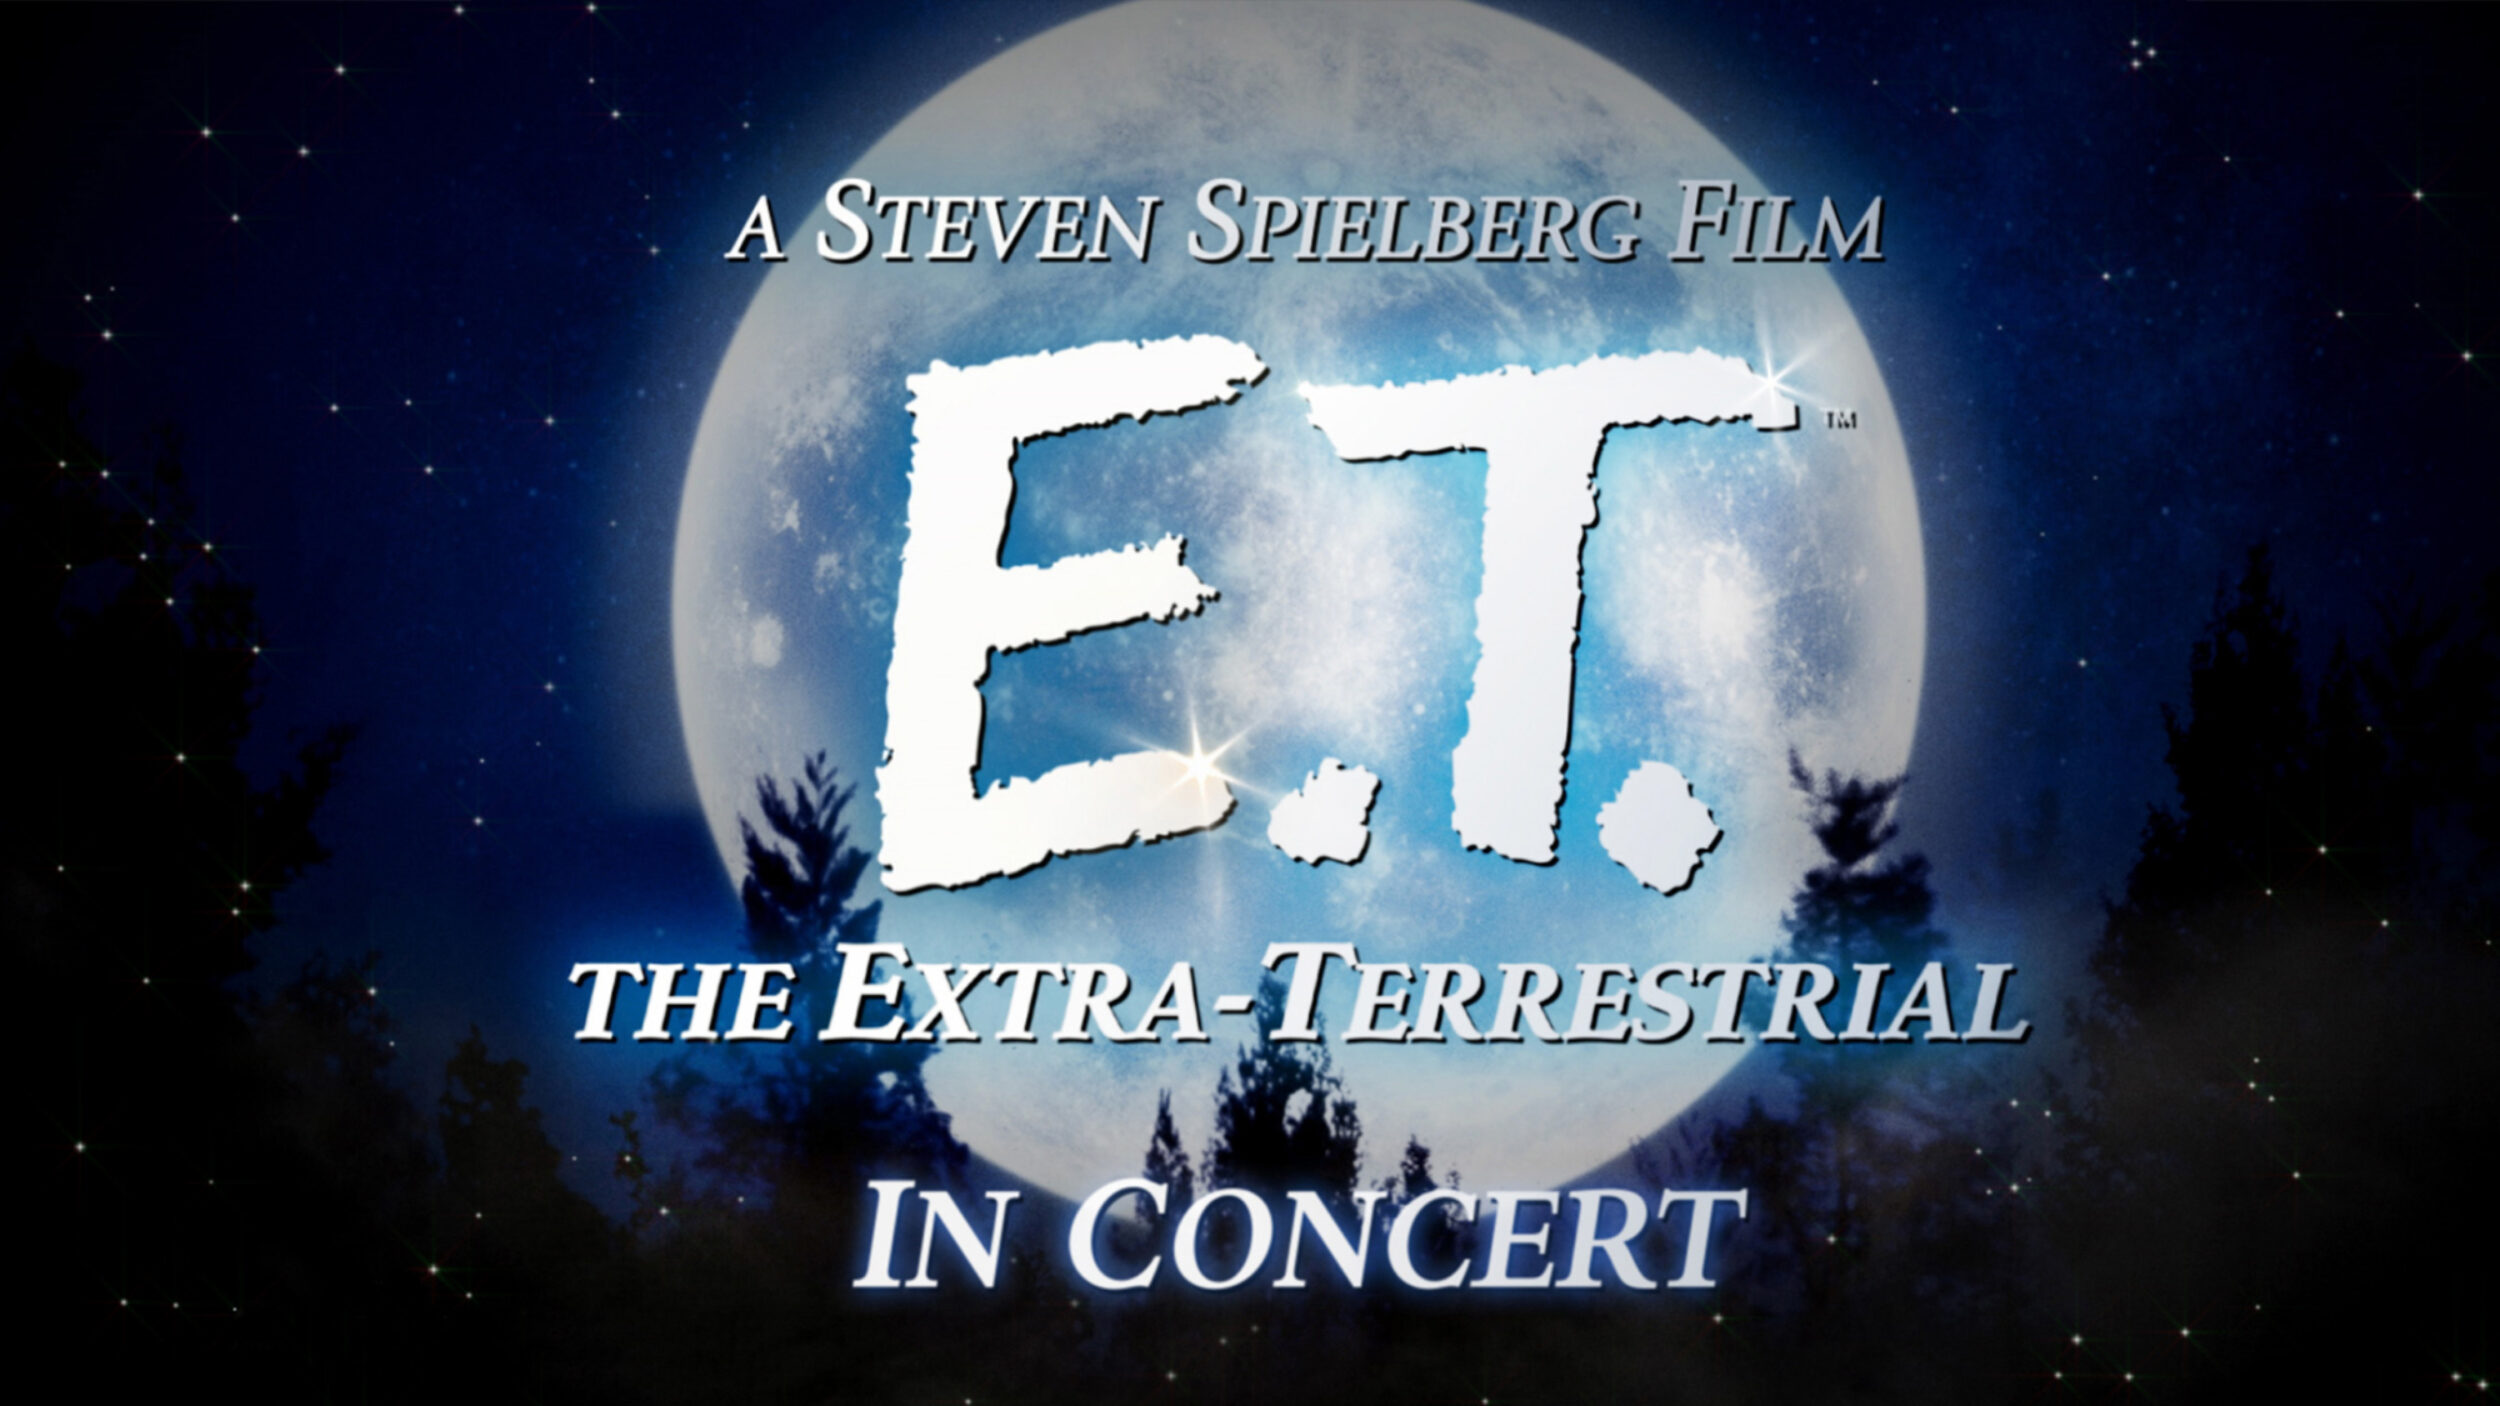 Watch E.T. The Extra-Terrestrial